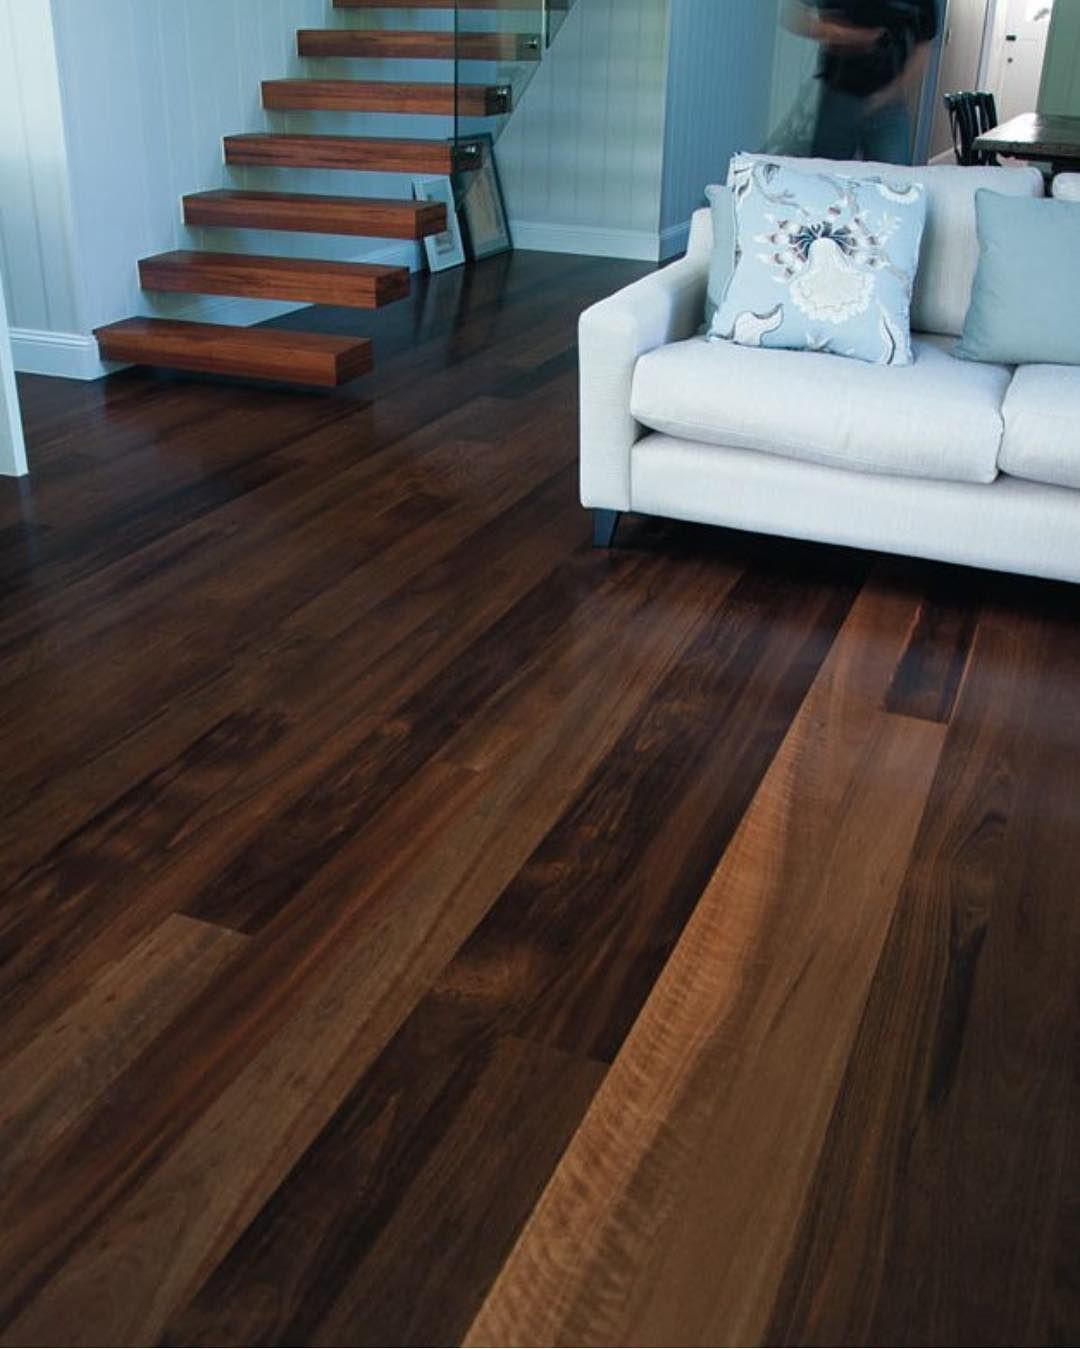 11 Recommended Spotted Gum Hardwood Flooring Prices 2024 free download spotted gum hardwood flooring prices of the new roasted peat premium timber flooring looks so stylish visit intended for the new roasted peat premium timber flooring looks so stylish visit o